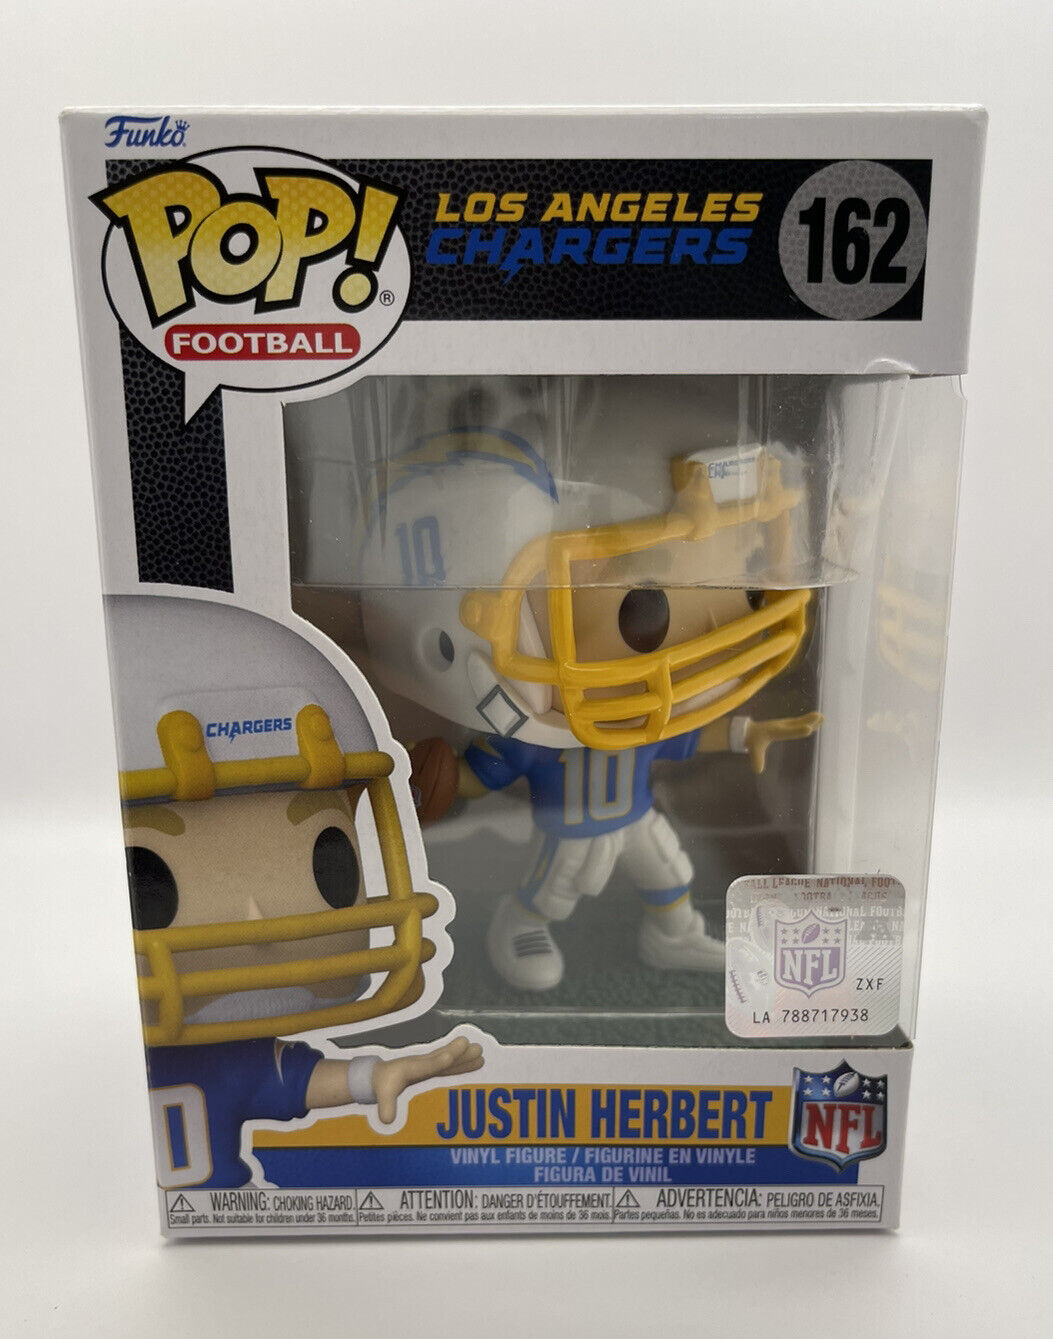 New Authentic Funko Pop #162  NFL  Justin Herbert Los Angeles Chargers